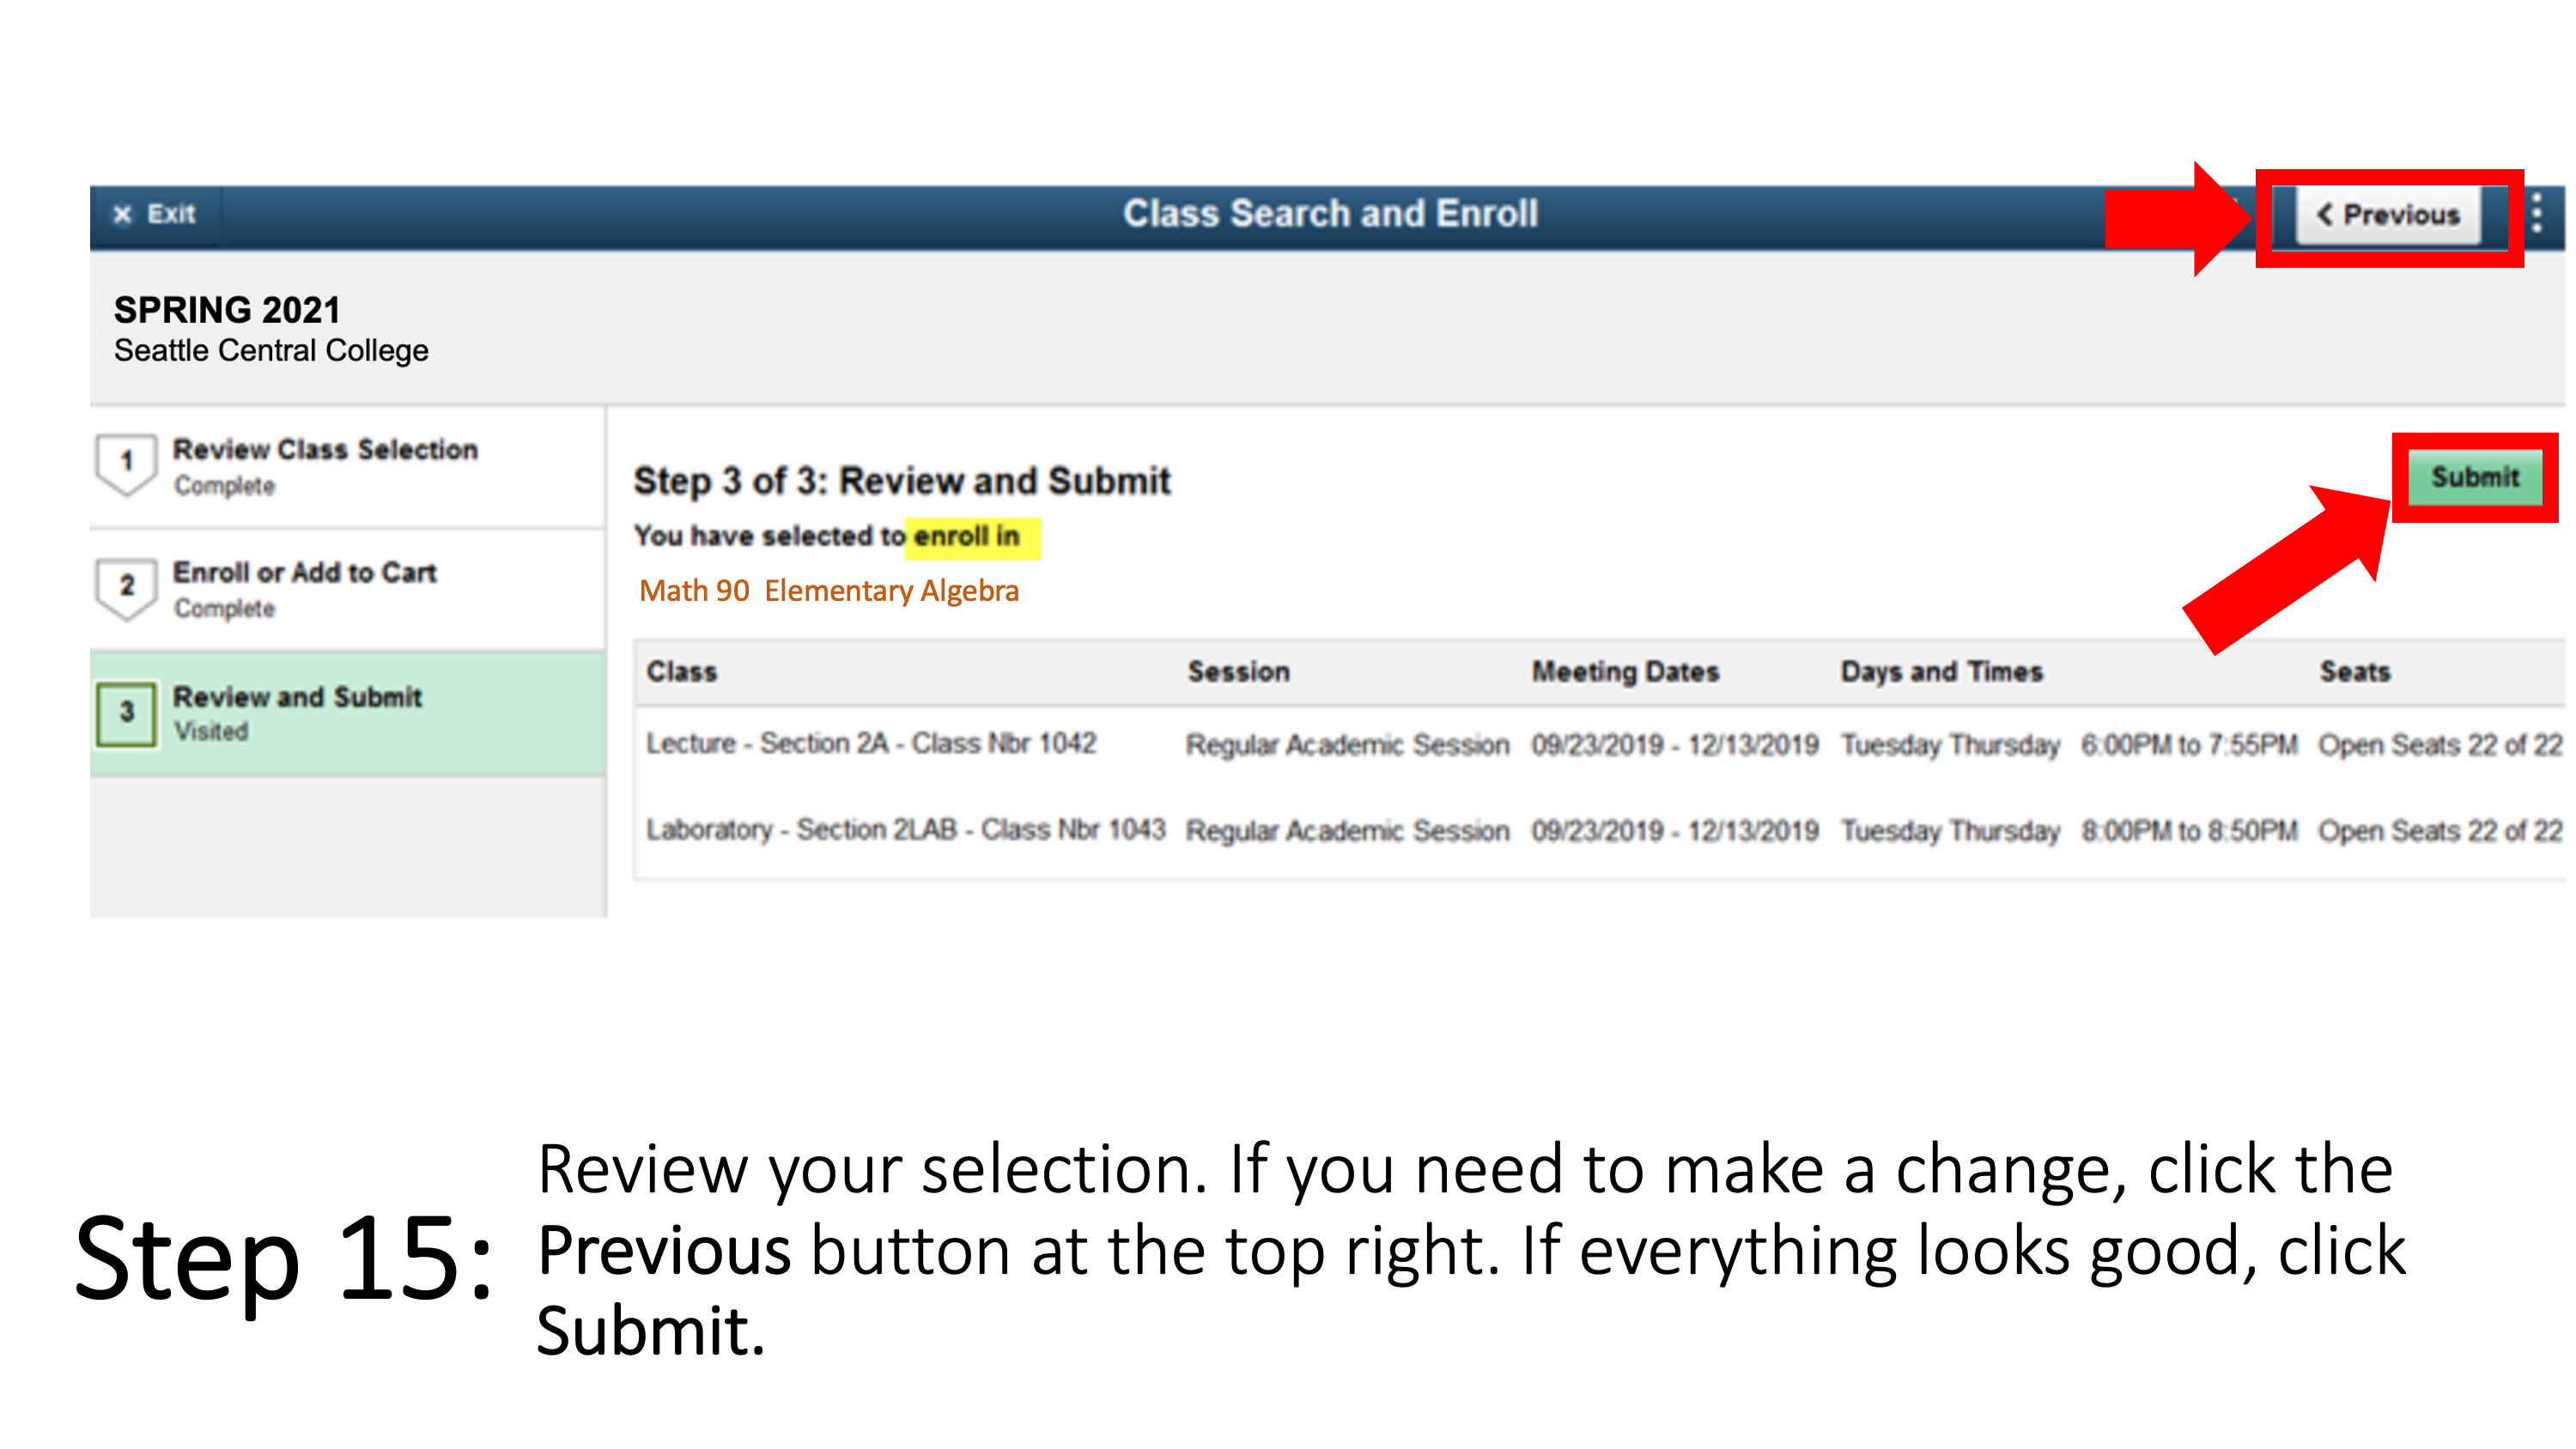 Review your selection. If you need to make a change, click the Previous button at the top right. If everything looks good, click Submit.